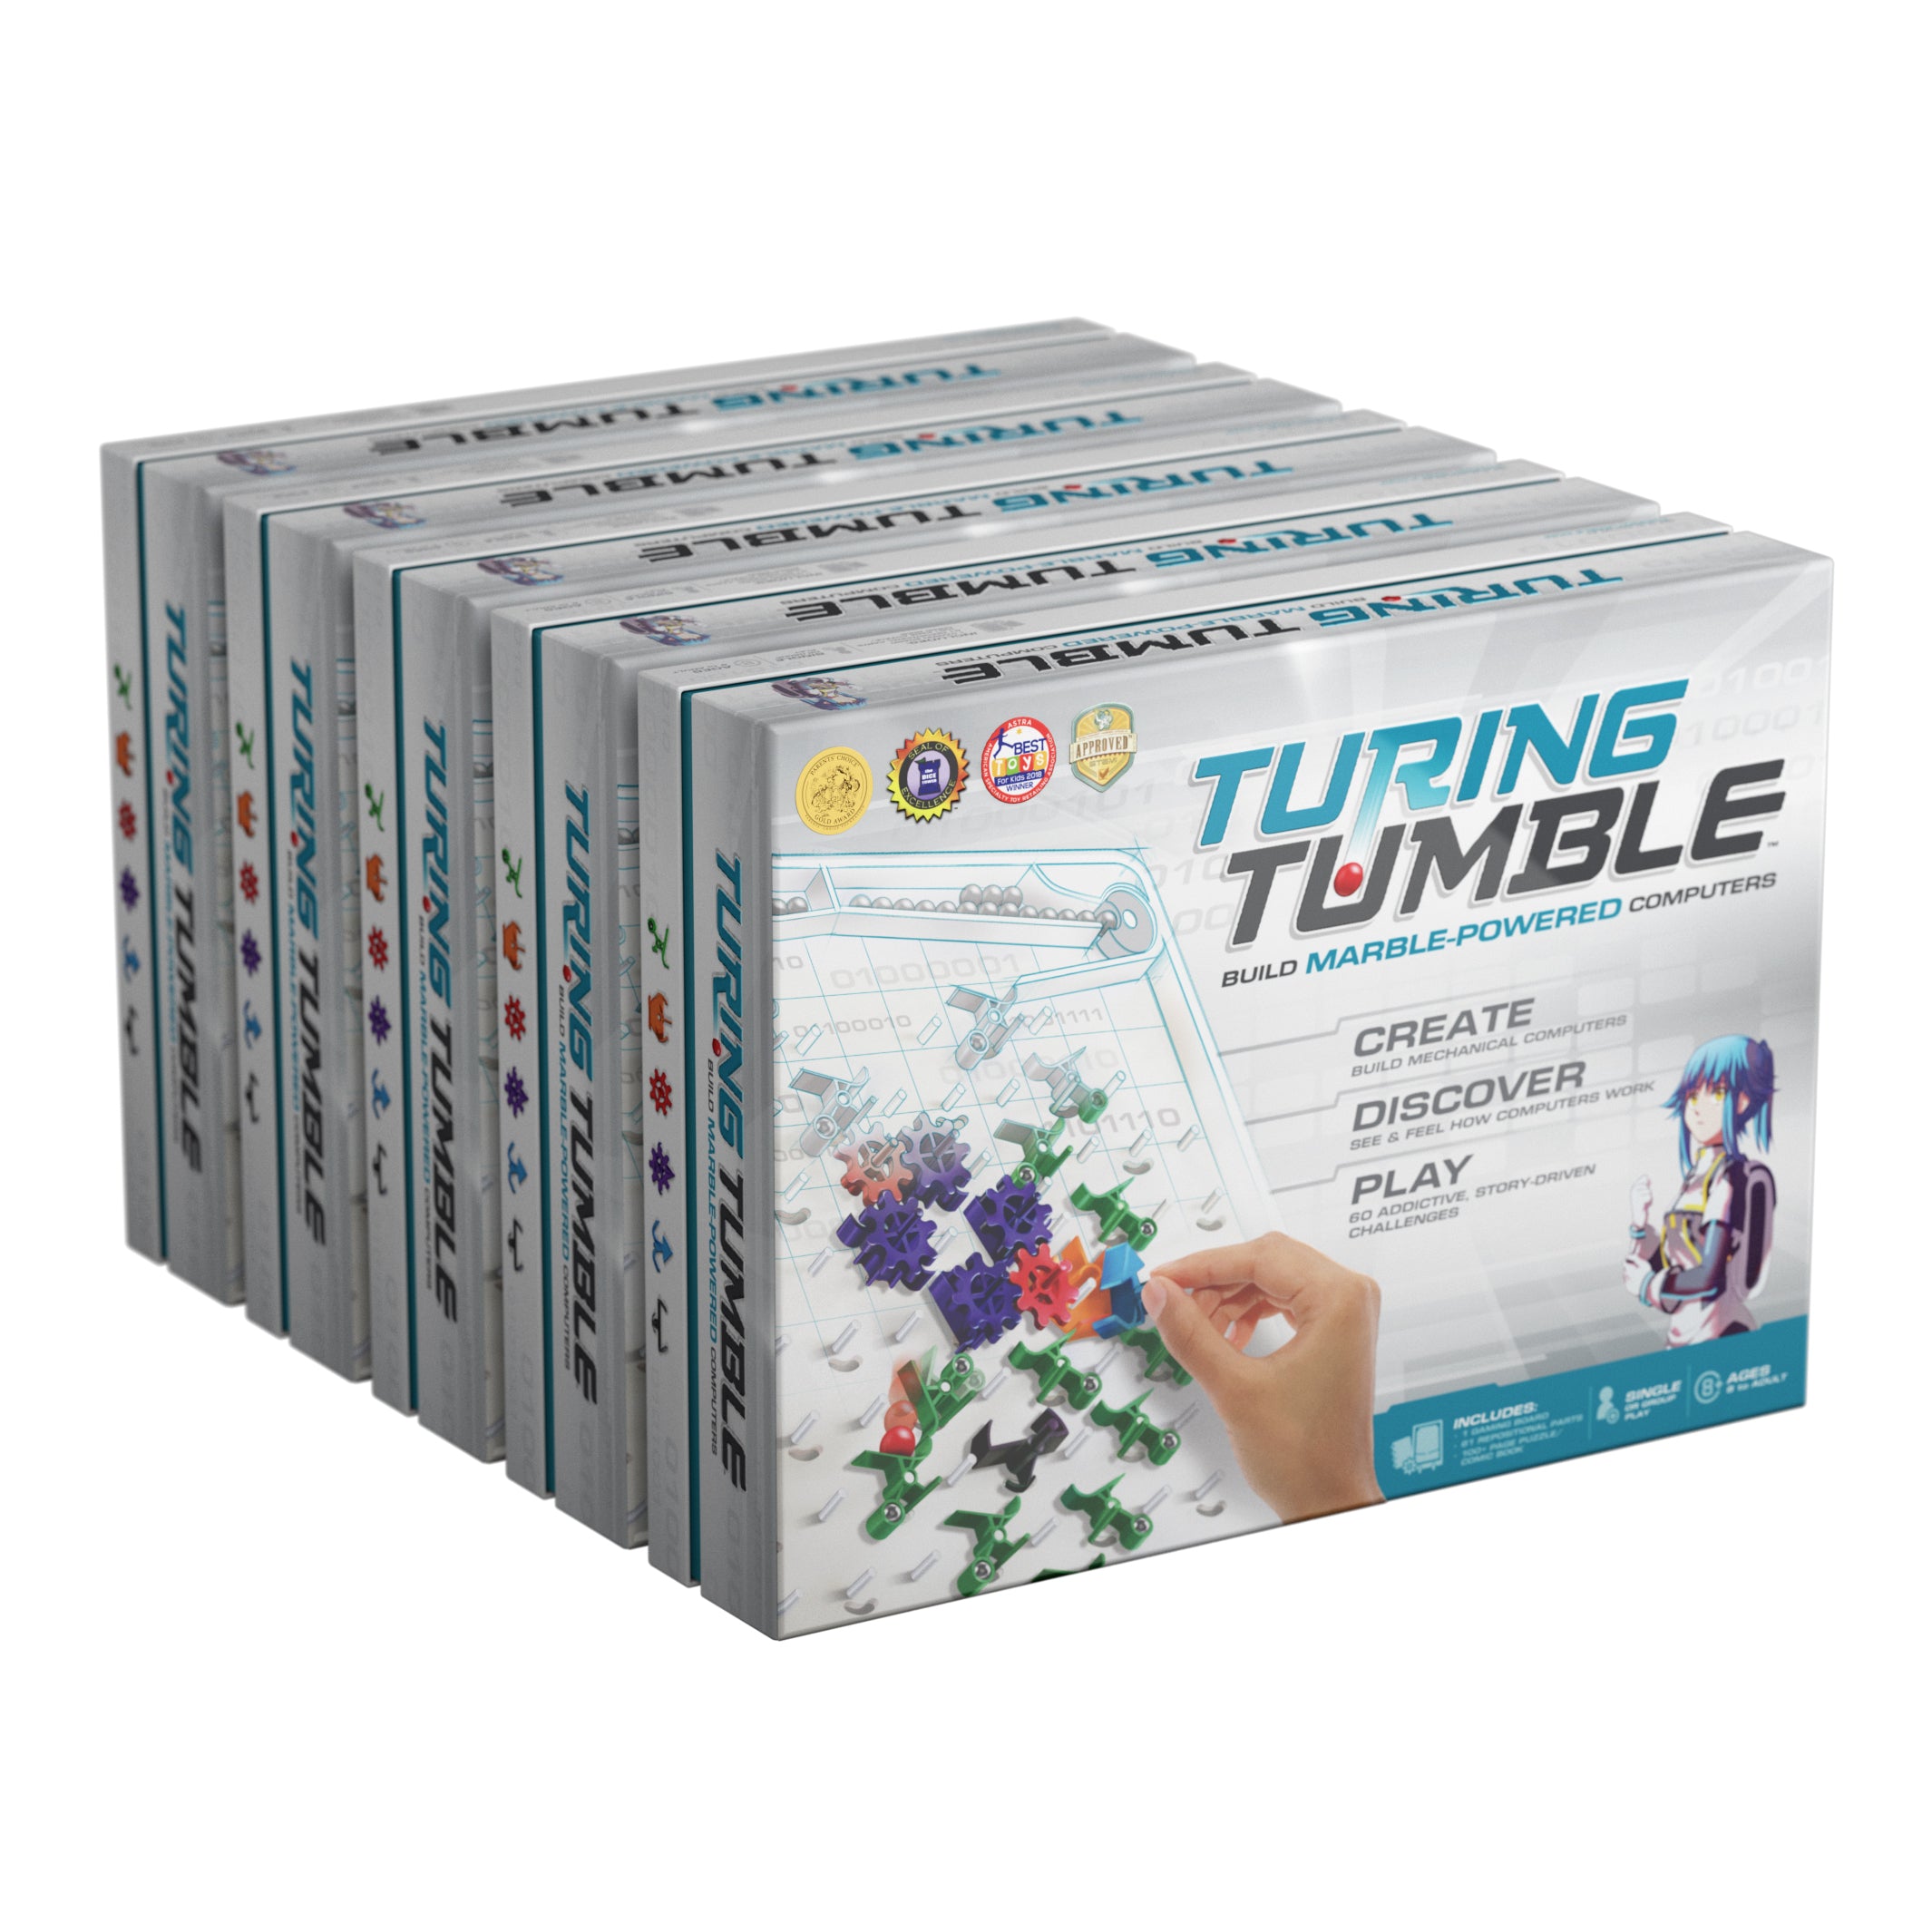 Turing Tumble Five-Pack – Upper Story